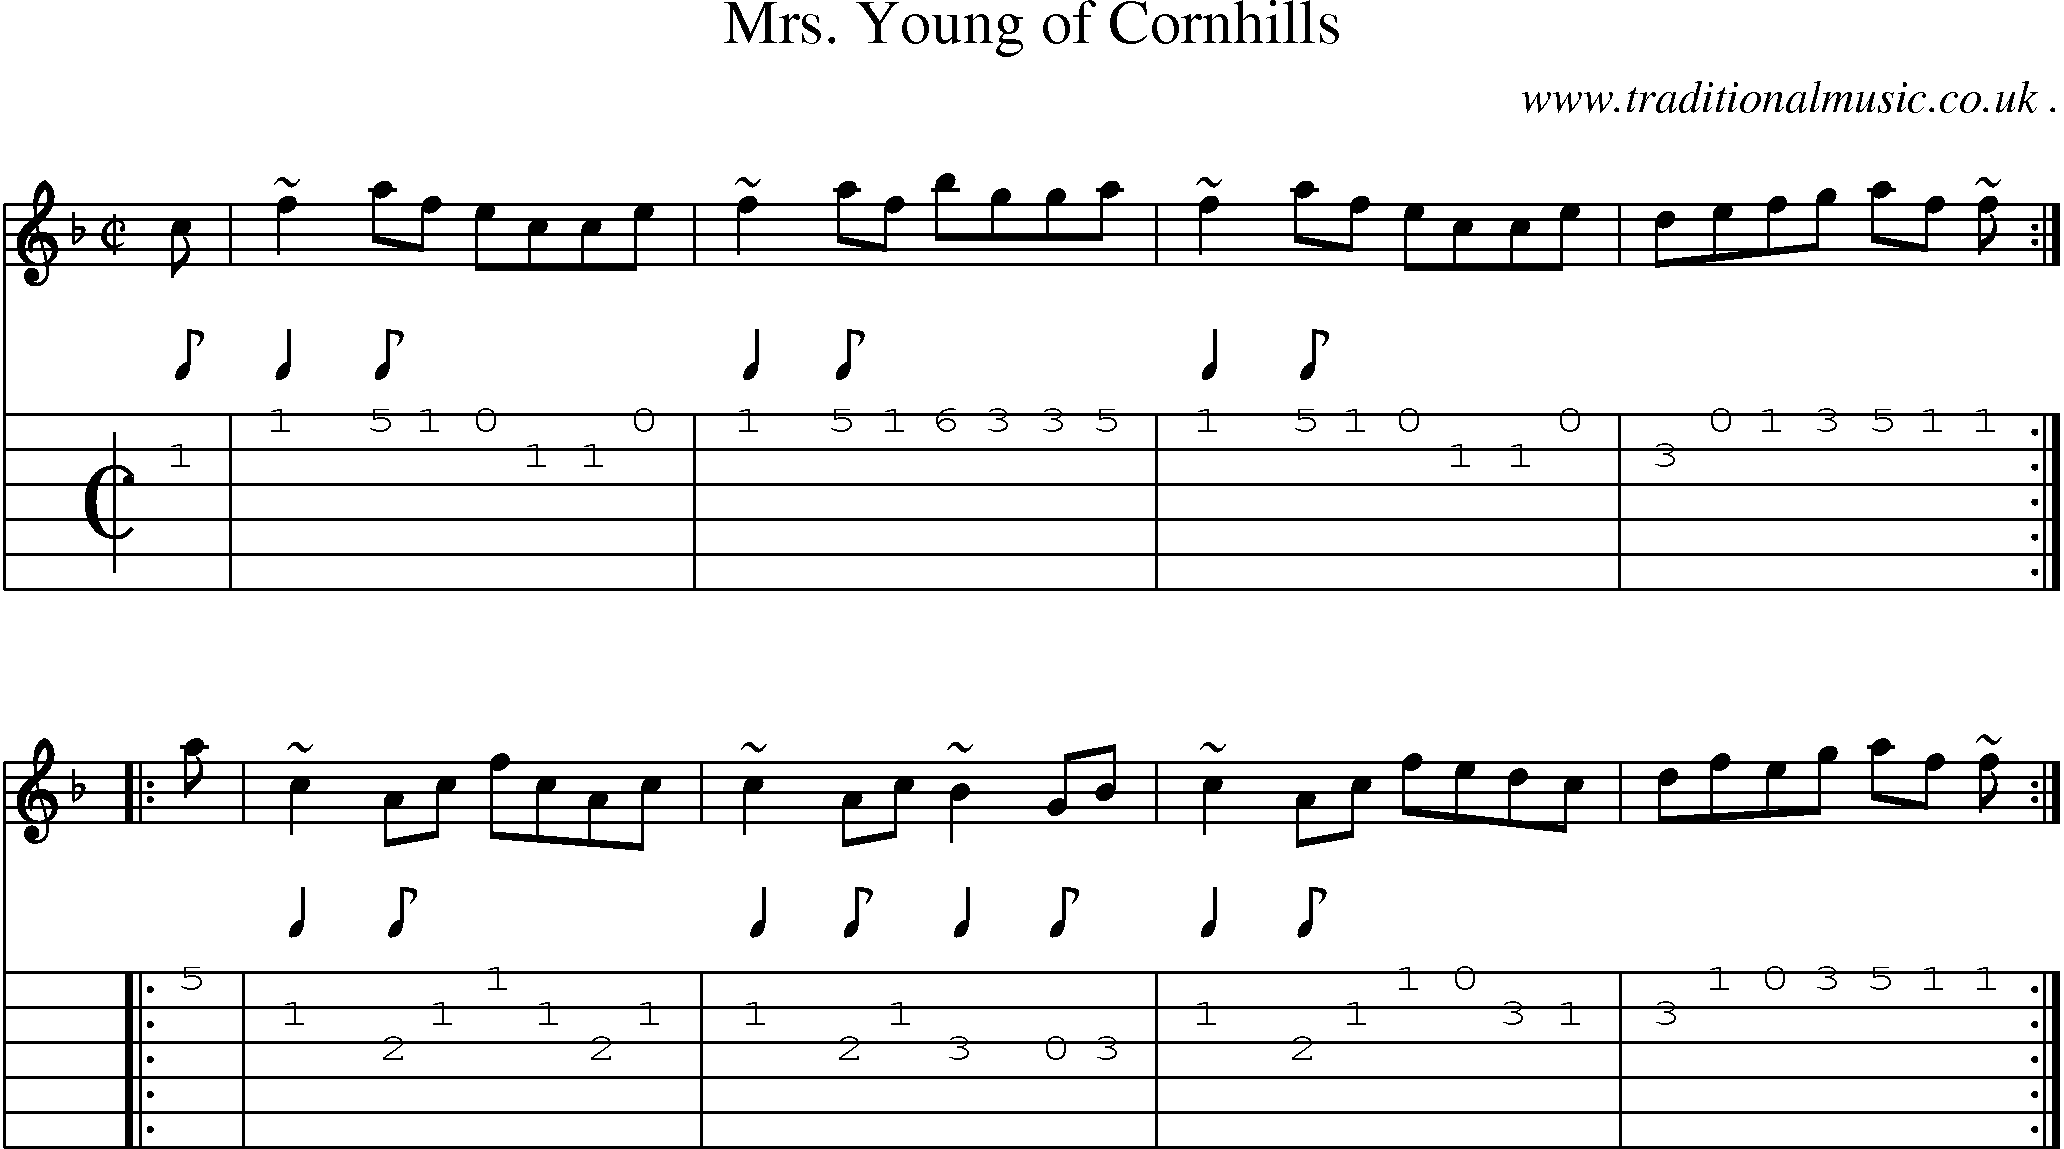 Sheet-music  score, Chords and Guitar Tabs for Mrs Young Of Cornhills